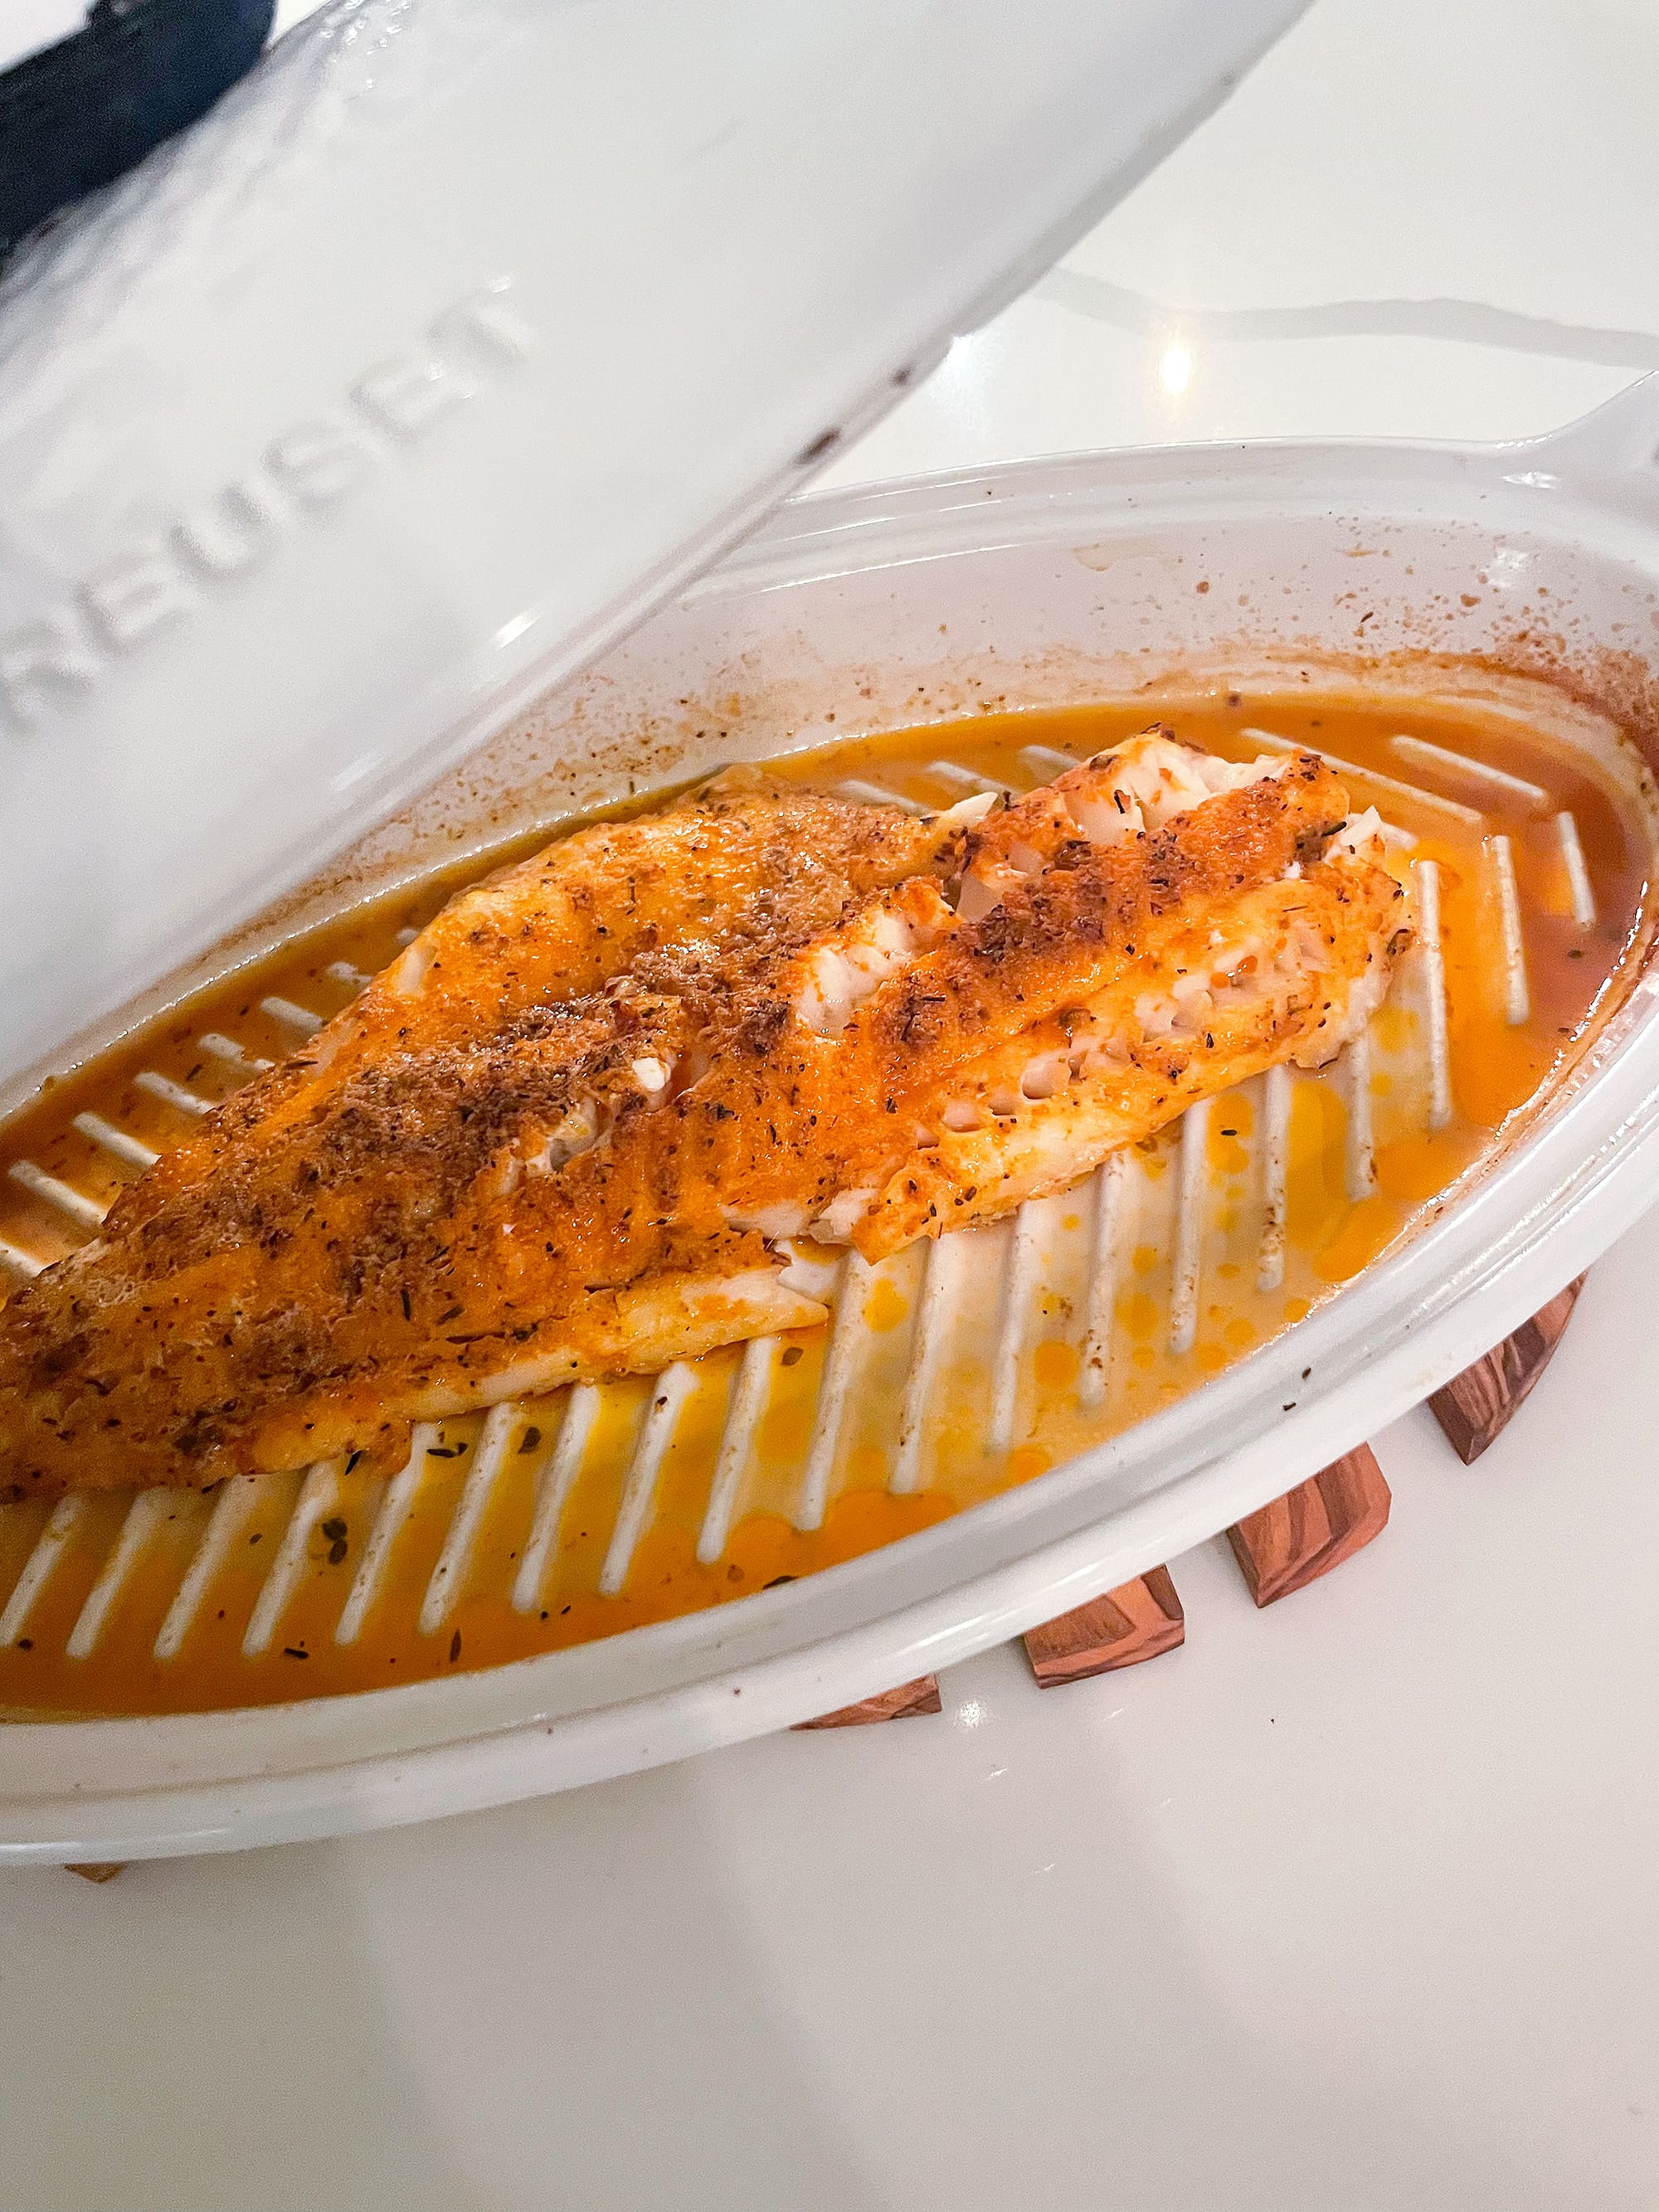 Le Creuset: The New Fish Baker is Here!